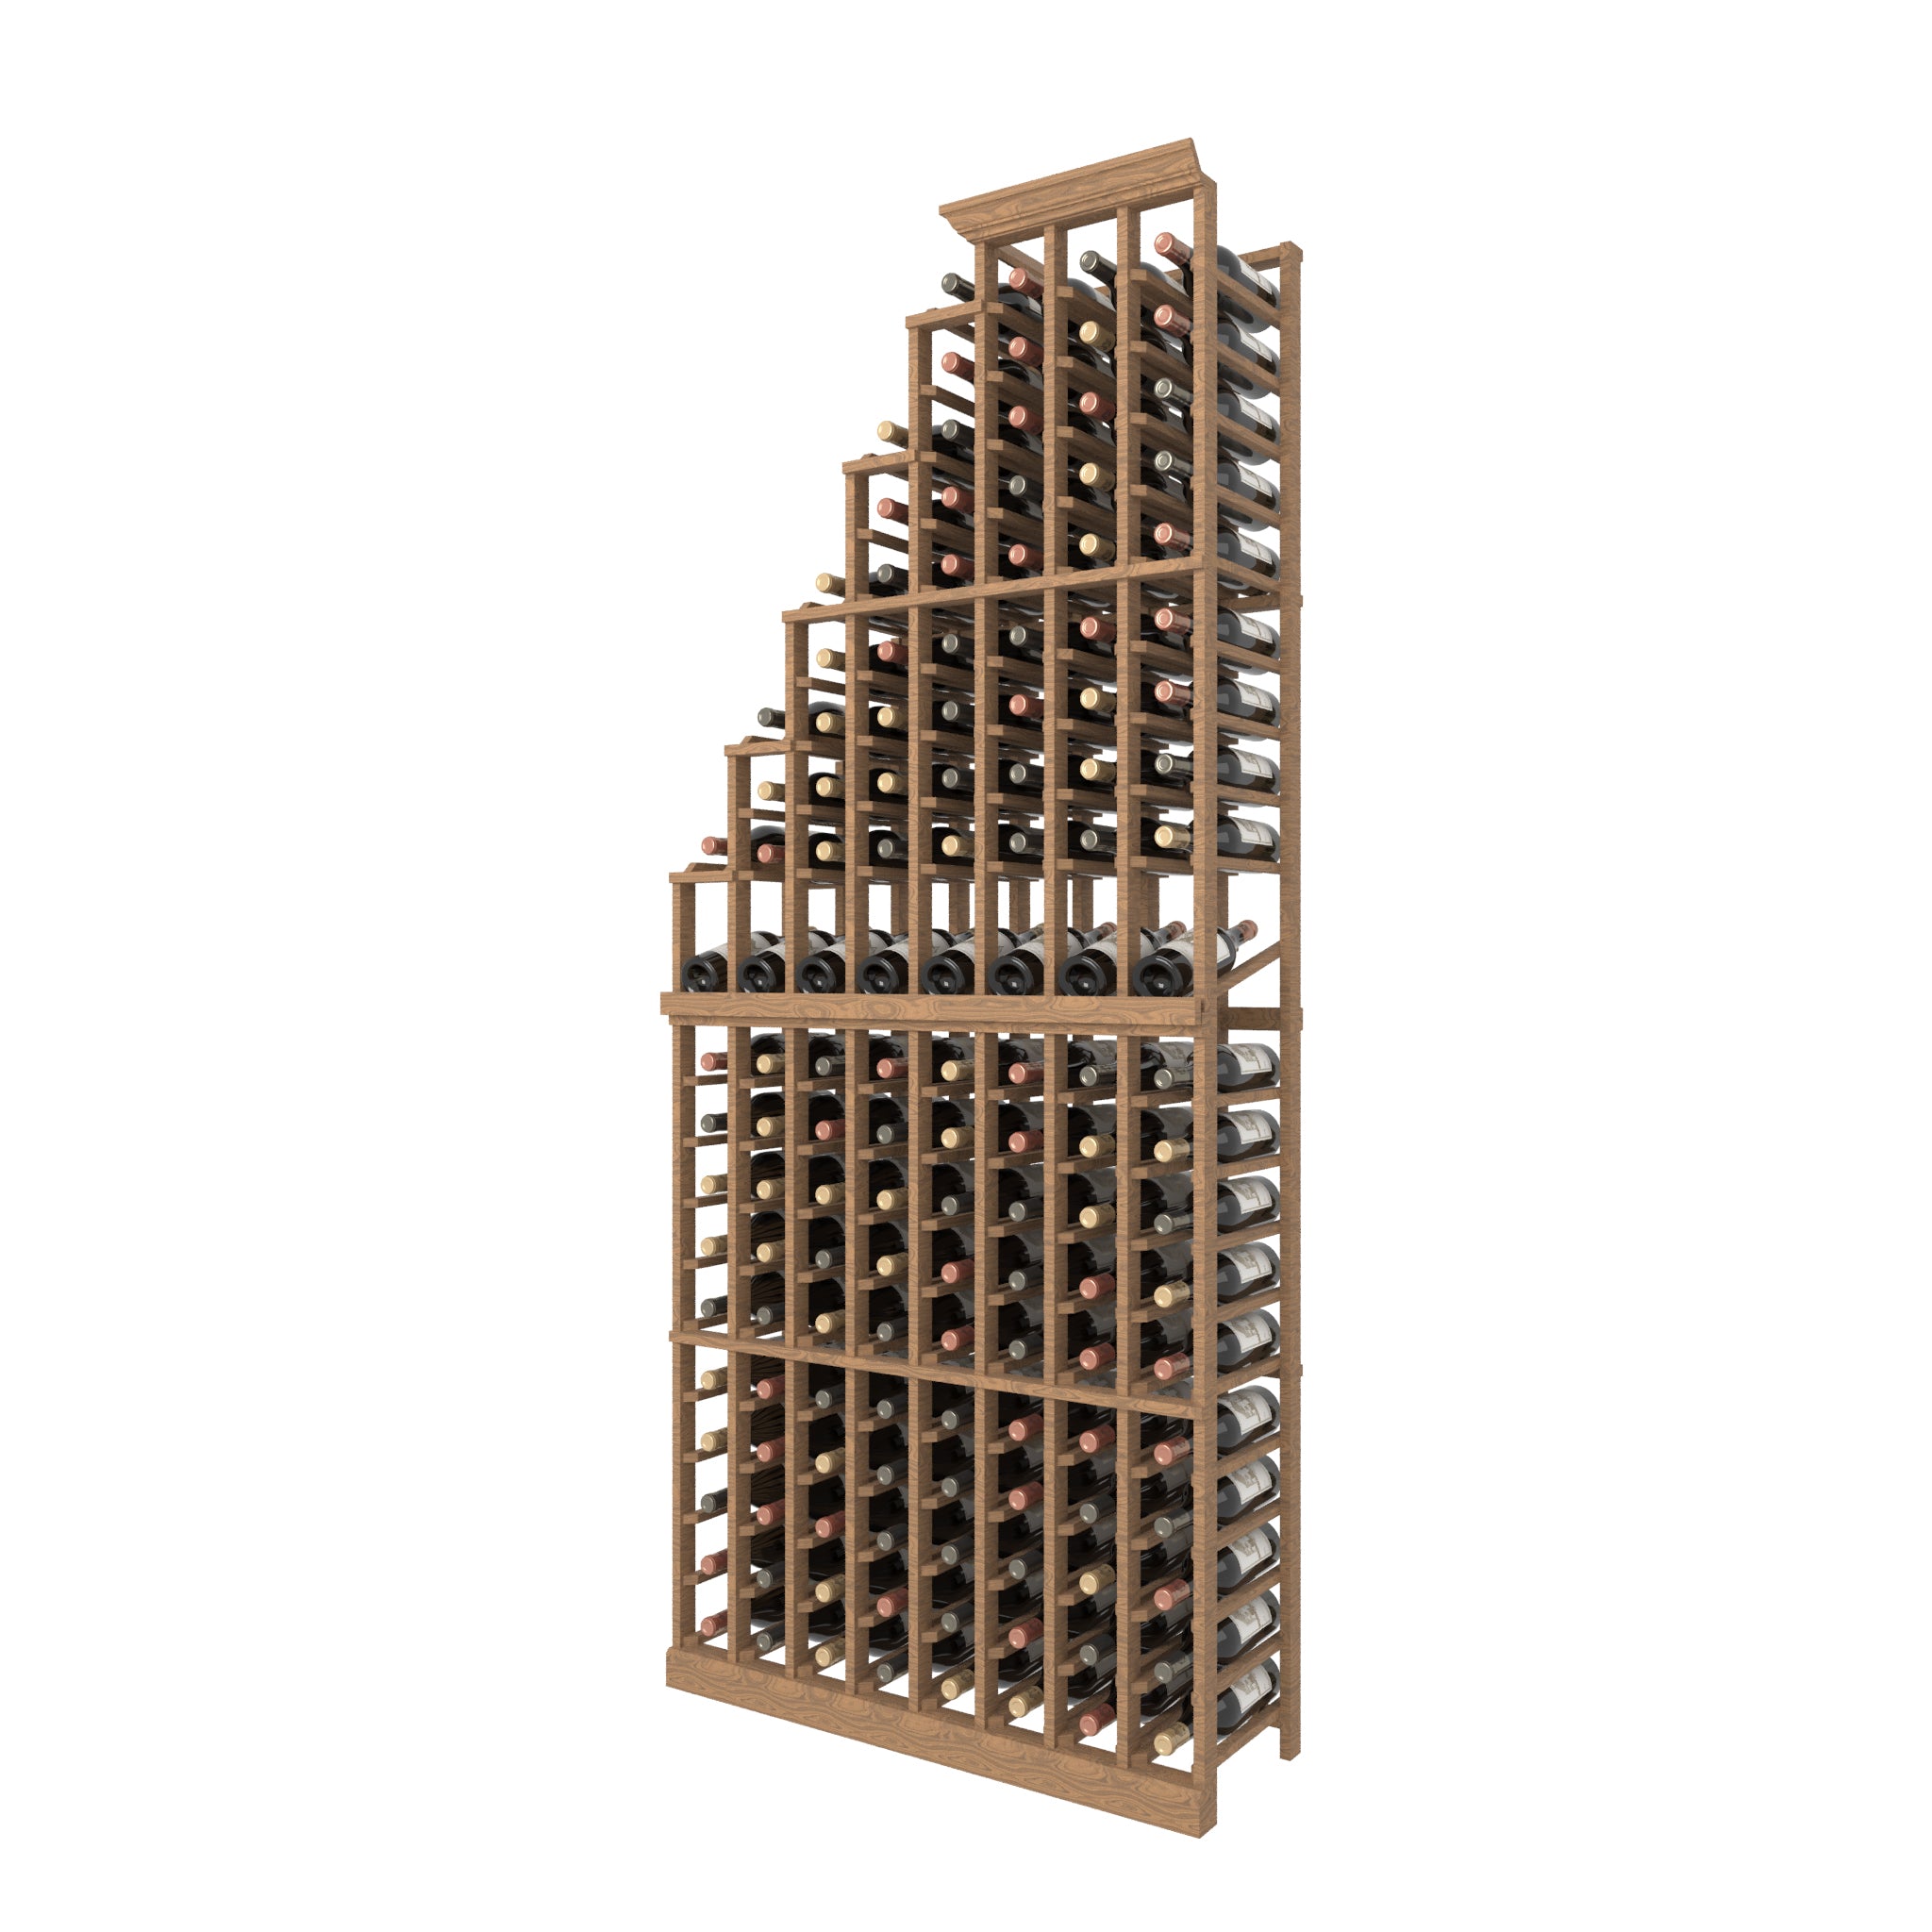 	8 Column Individual Bottle Cascade Wood Rack Left with Display Row